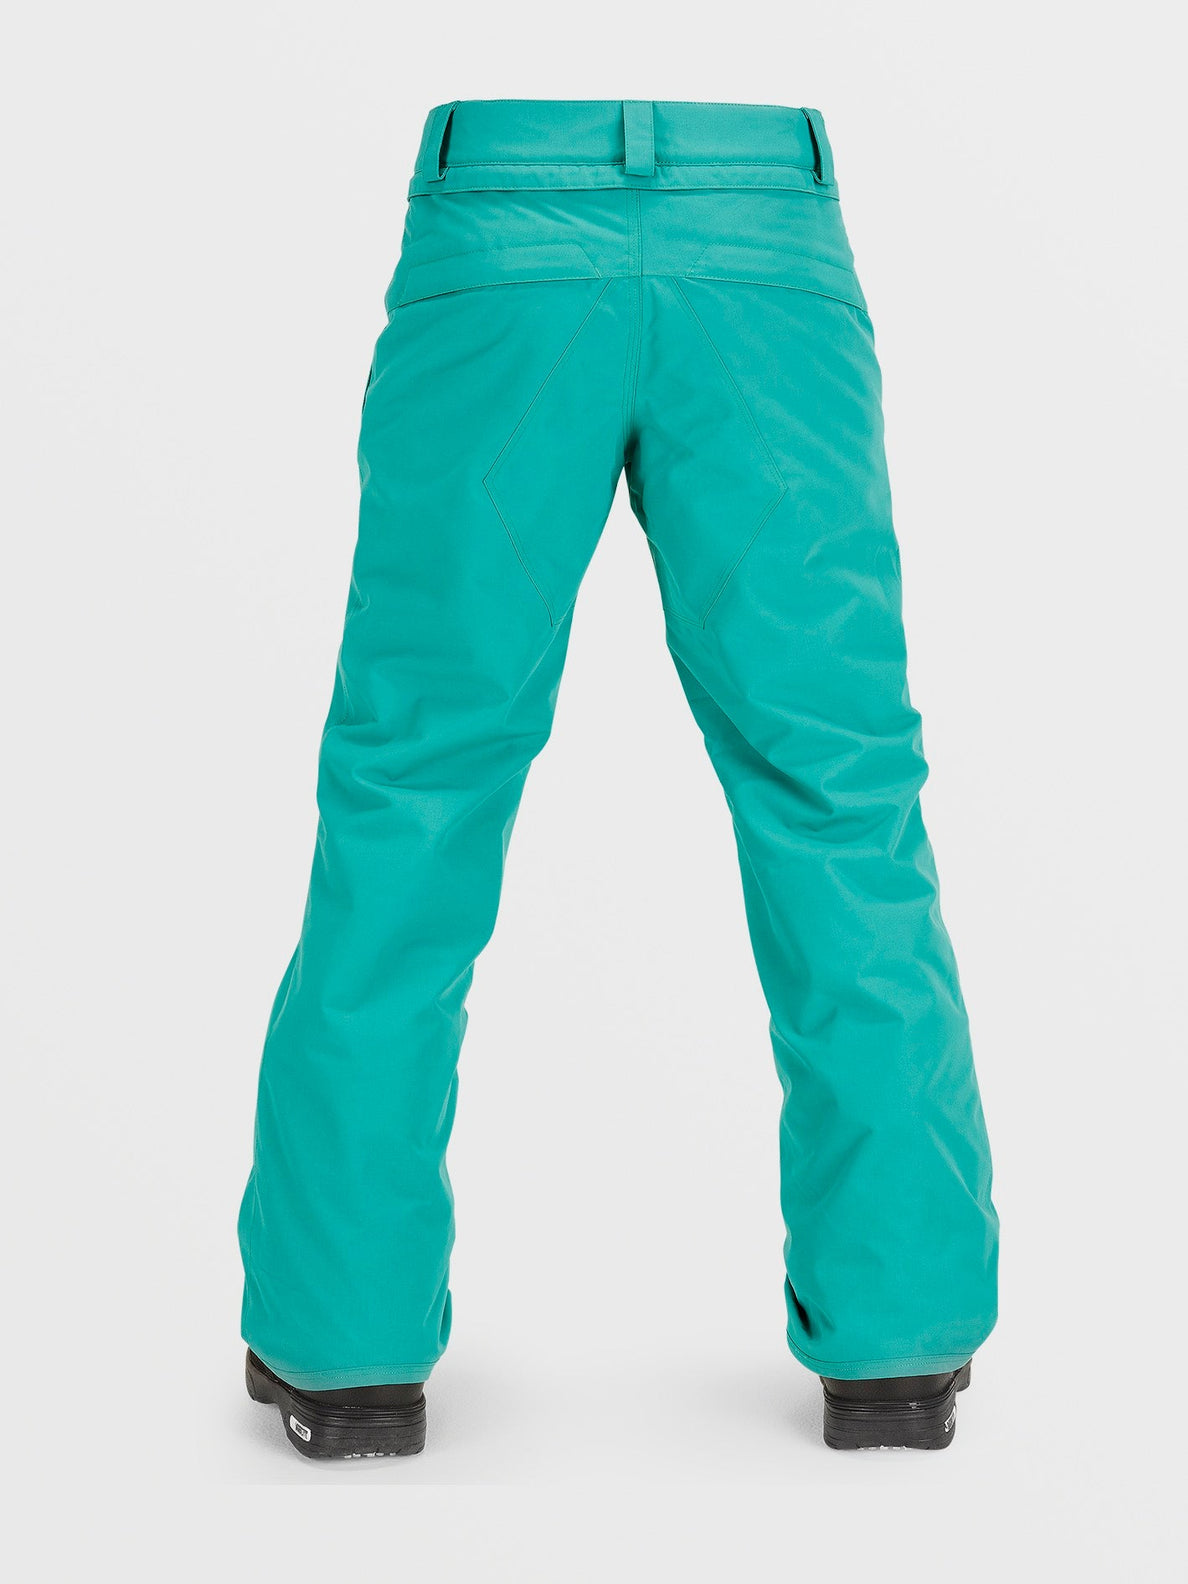 Frochickidee Insulated Trousers - VIBRANT GREEN - (KIDS) (N1252400_VBG) [B]